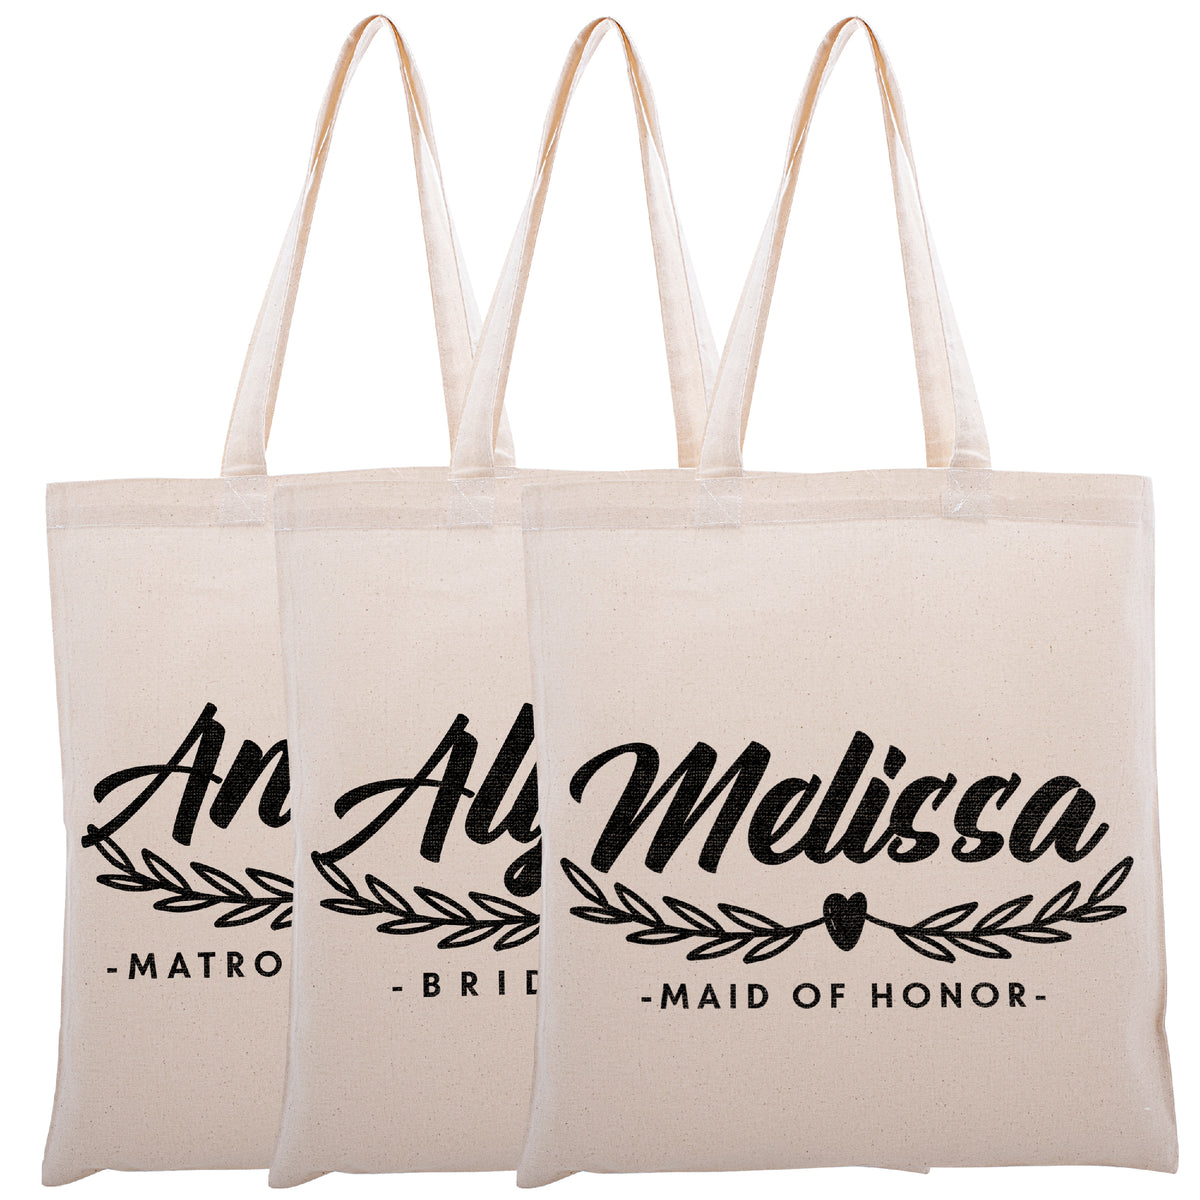 Personalized Tote Bag  Customize Name Travel Bachelorette Party and G –  Zexpa Apparel